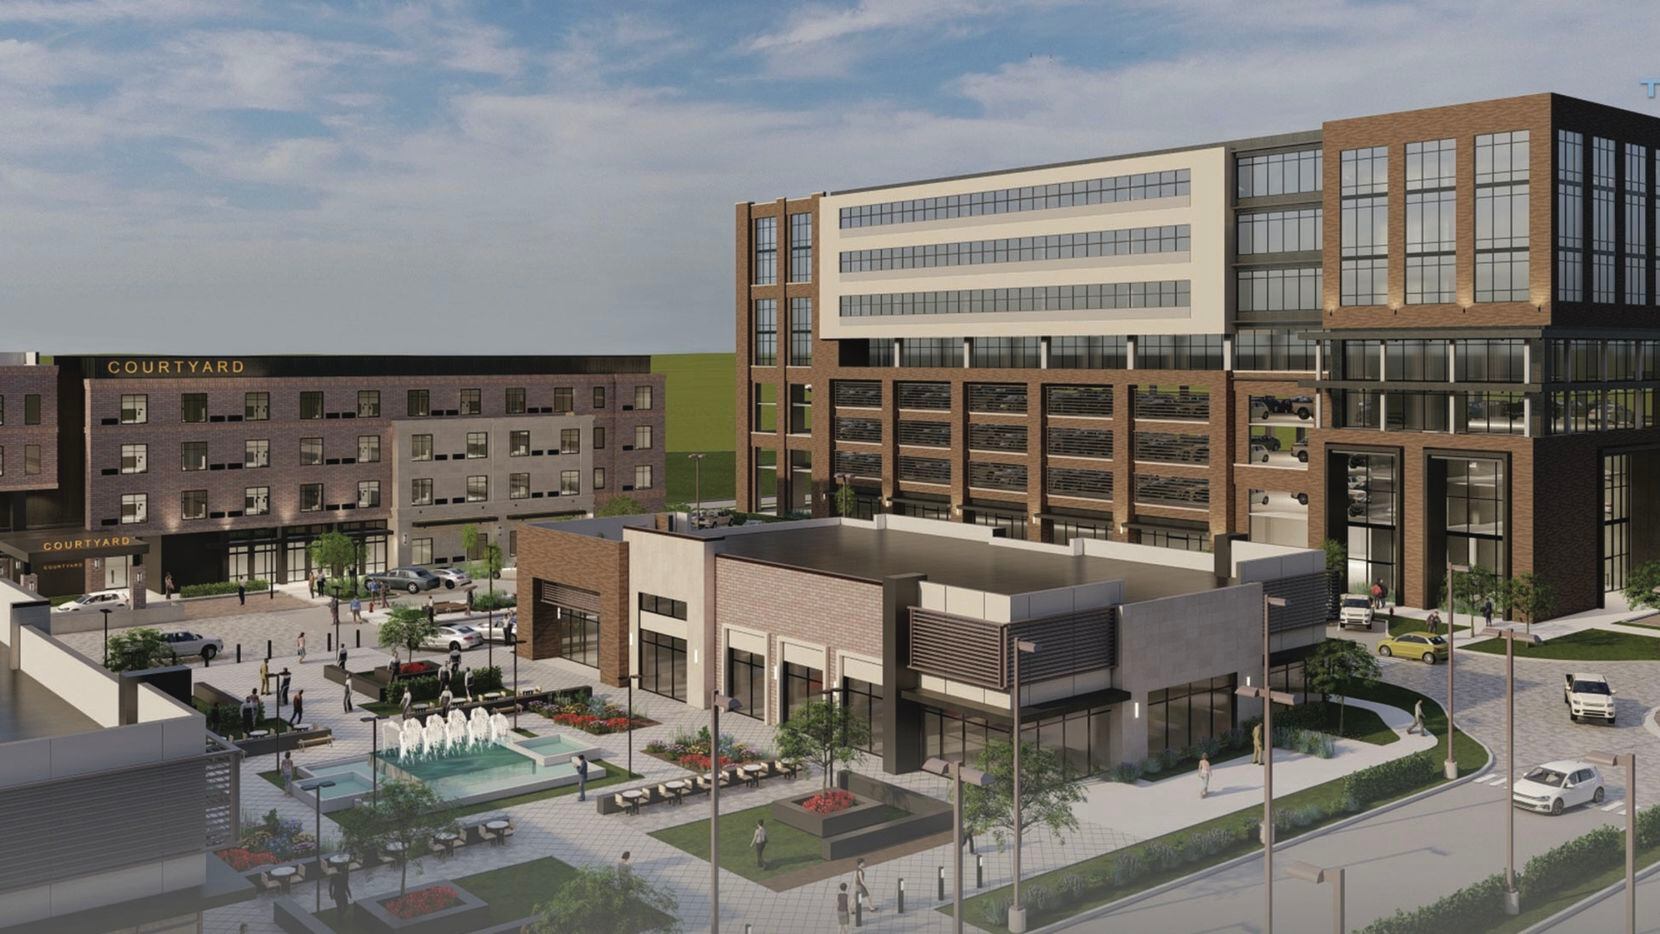 The $70 million Heritage Park Mansfield development will include a hotel, office and retail...